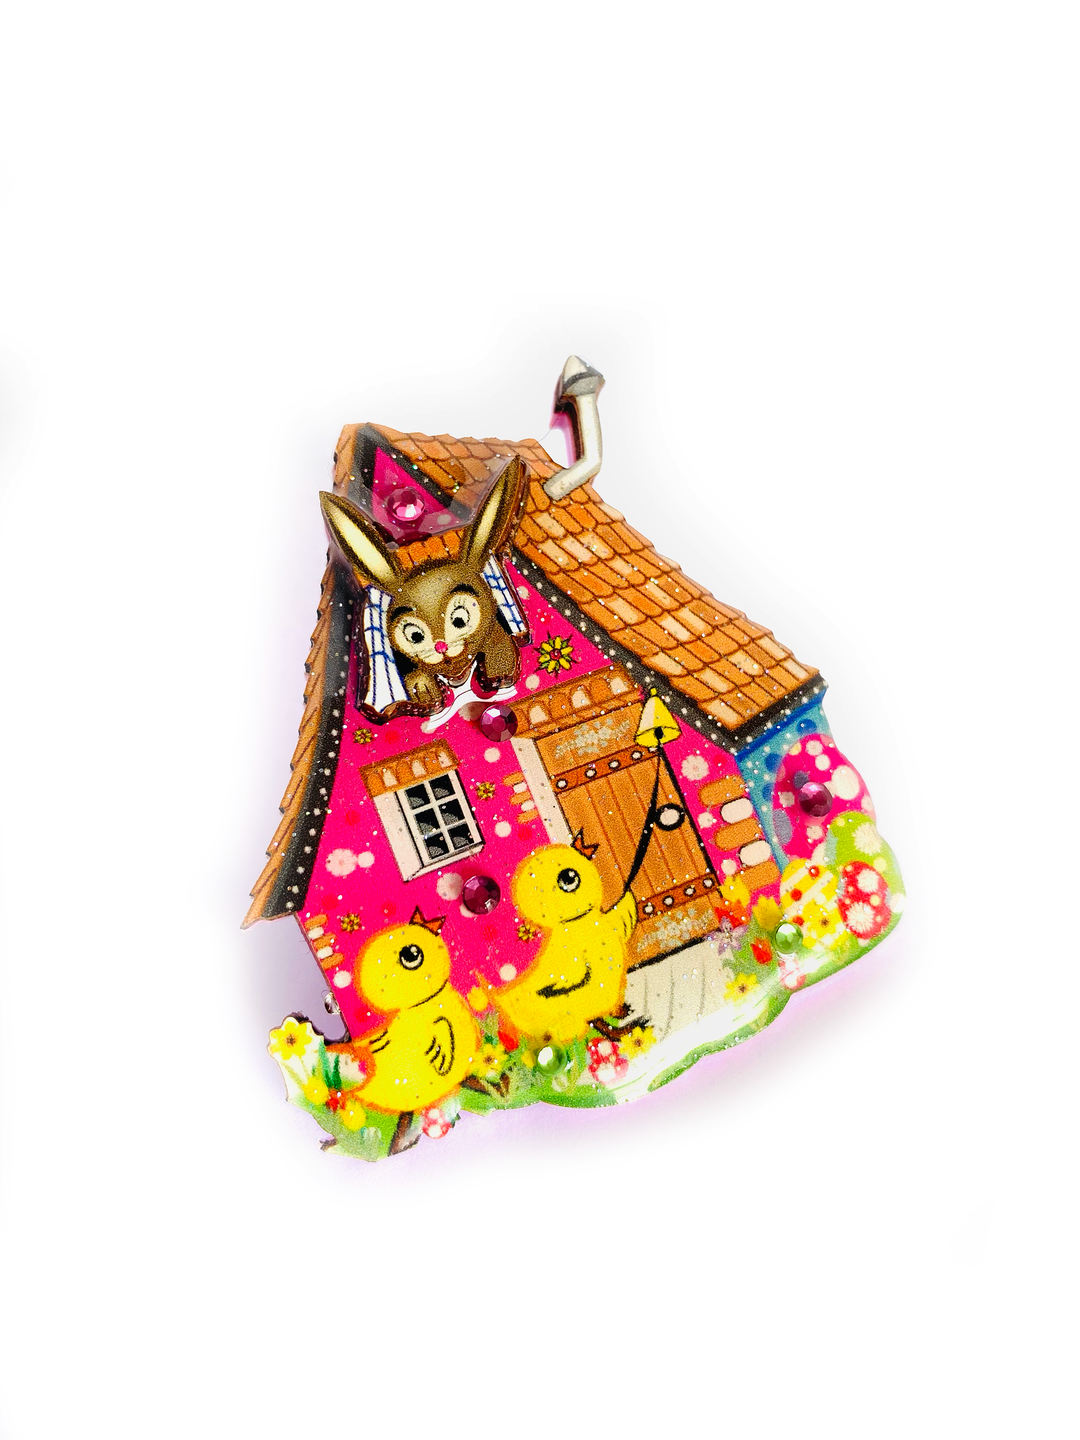 The Little Easter House Brooch by Rosie Rose Parker